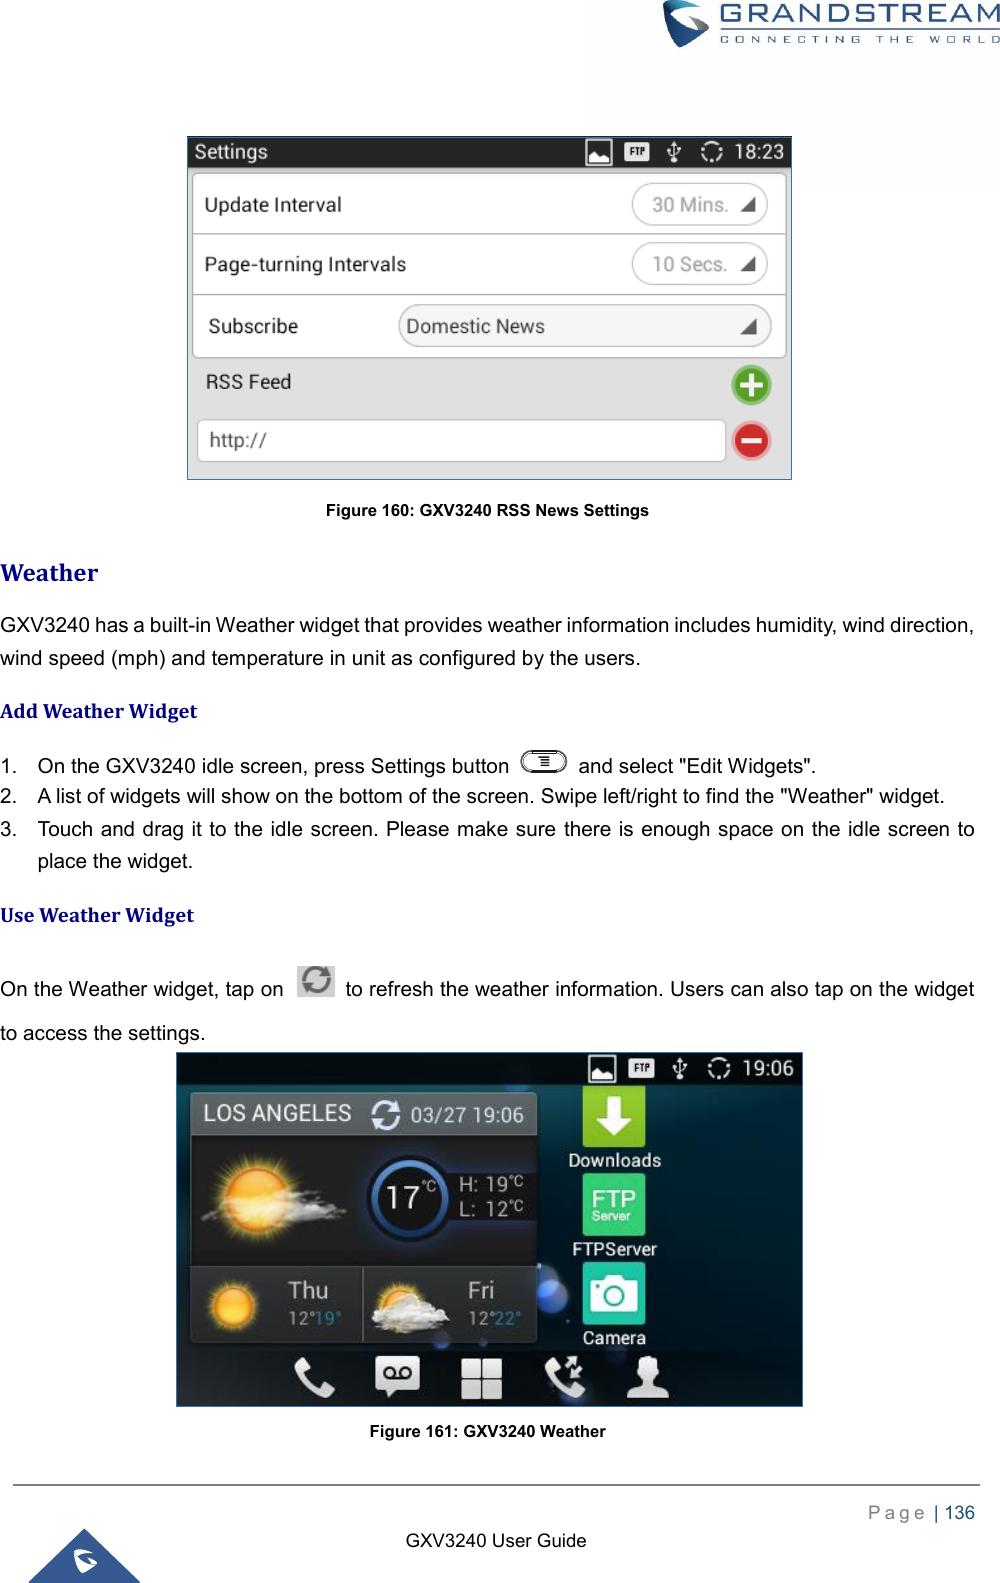    P a g e  | 136    GXV3240 User Guide    Figure 160: GXV3240 RSS News Settings Weather GXV3240 has a built-in Weather widget that provides weather information includes humidity, wind direction, wind speed (mph) and temperature in unit as configured by the users. Add Weather Widget 1.  On the GXV3240 idle screen, press Settings button    and select &quot;Edit Widgets&quot;. 2.  A list of widgets will show on the bottom of the screen. Swipe left/right to find the &quot;Weather&quot; widget. 3.  Touch and drag it to the idle screen. Please make sure there is enough space on the idle screen to place the widget. Use Weather Widget On the Weather widget, tap on    to refresh the weather information. Users can also tap on the widget to access the settings.  Figure 161: GXV3240 Weather 